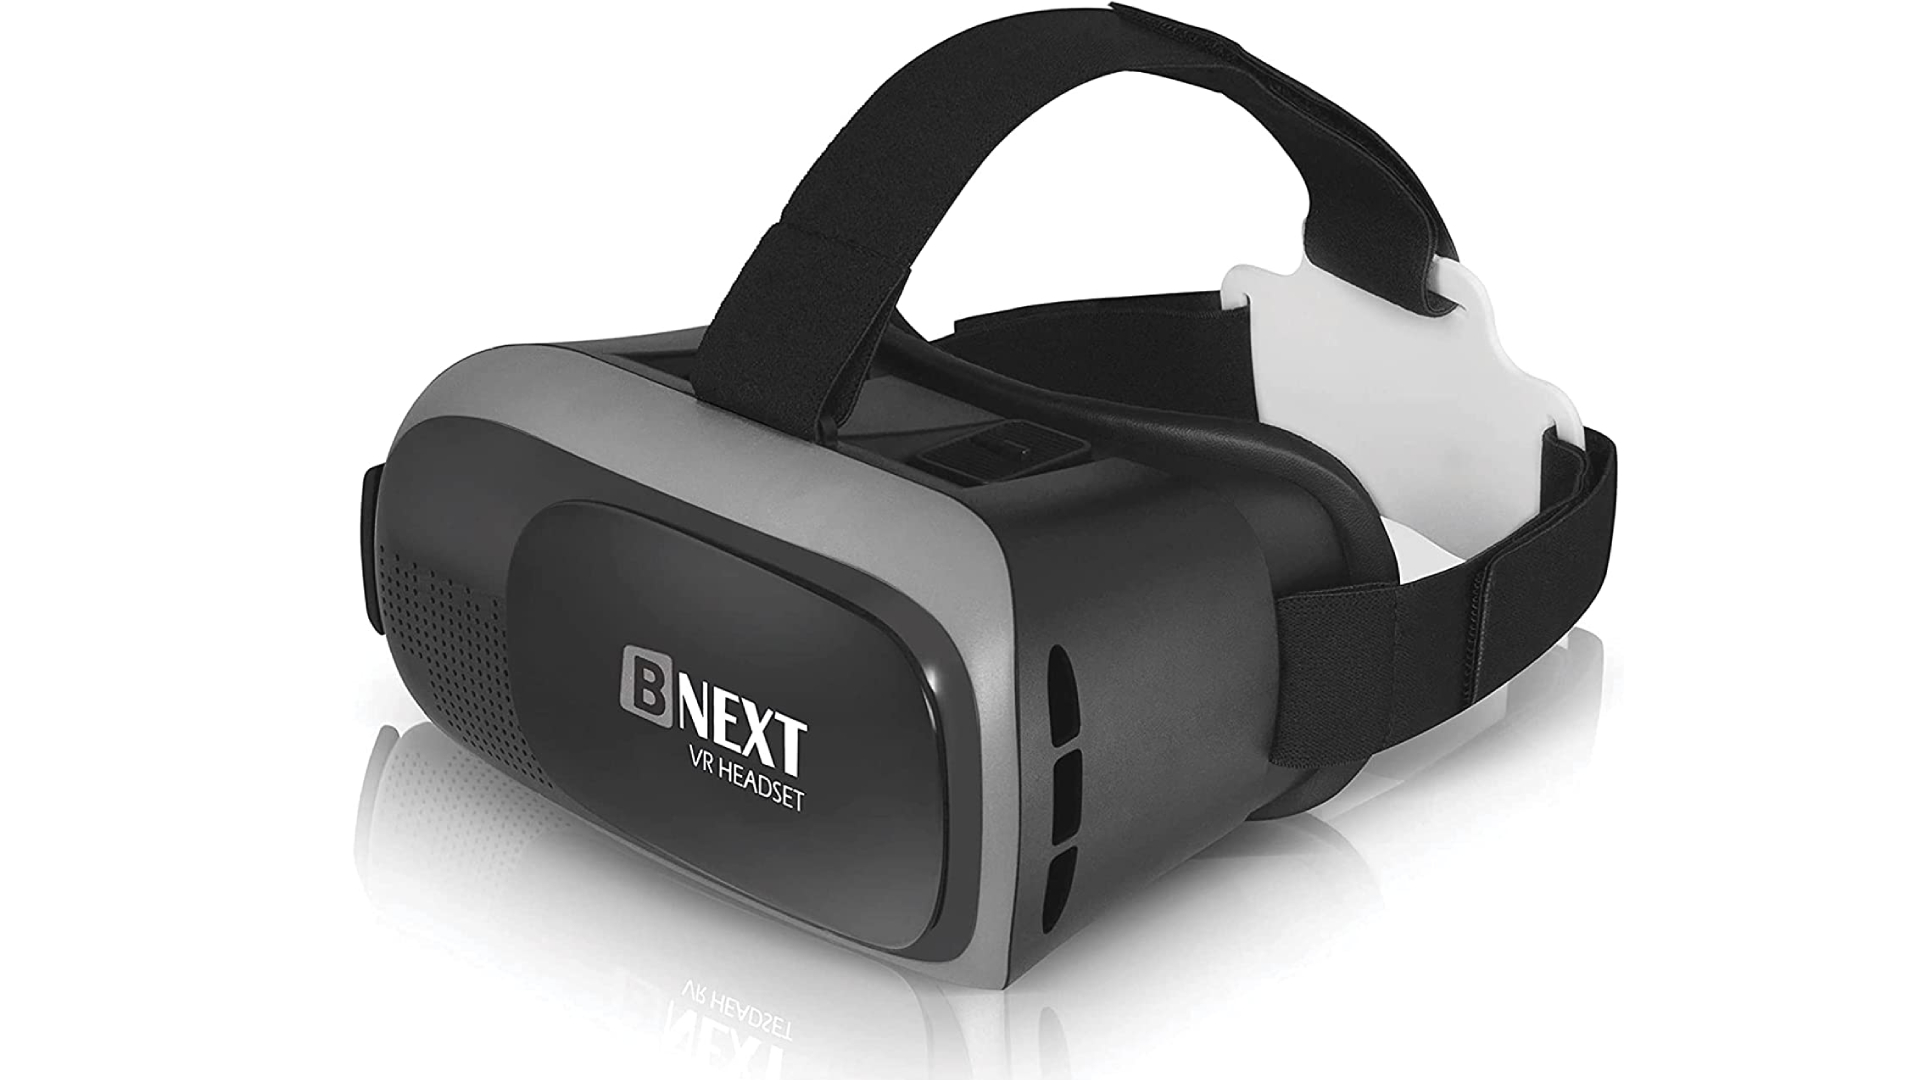 Best VR headset: Bnext virtual reality headset on white backdrop